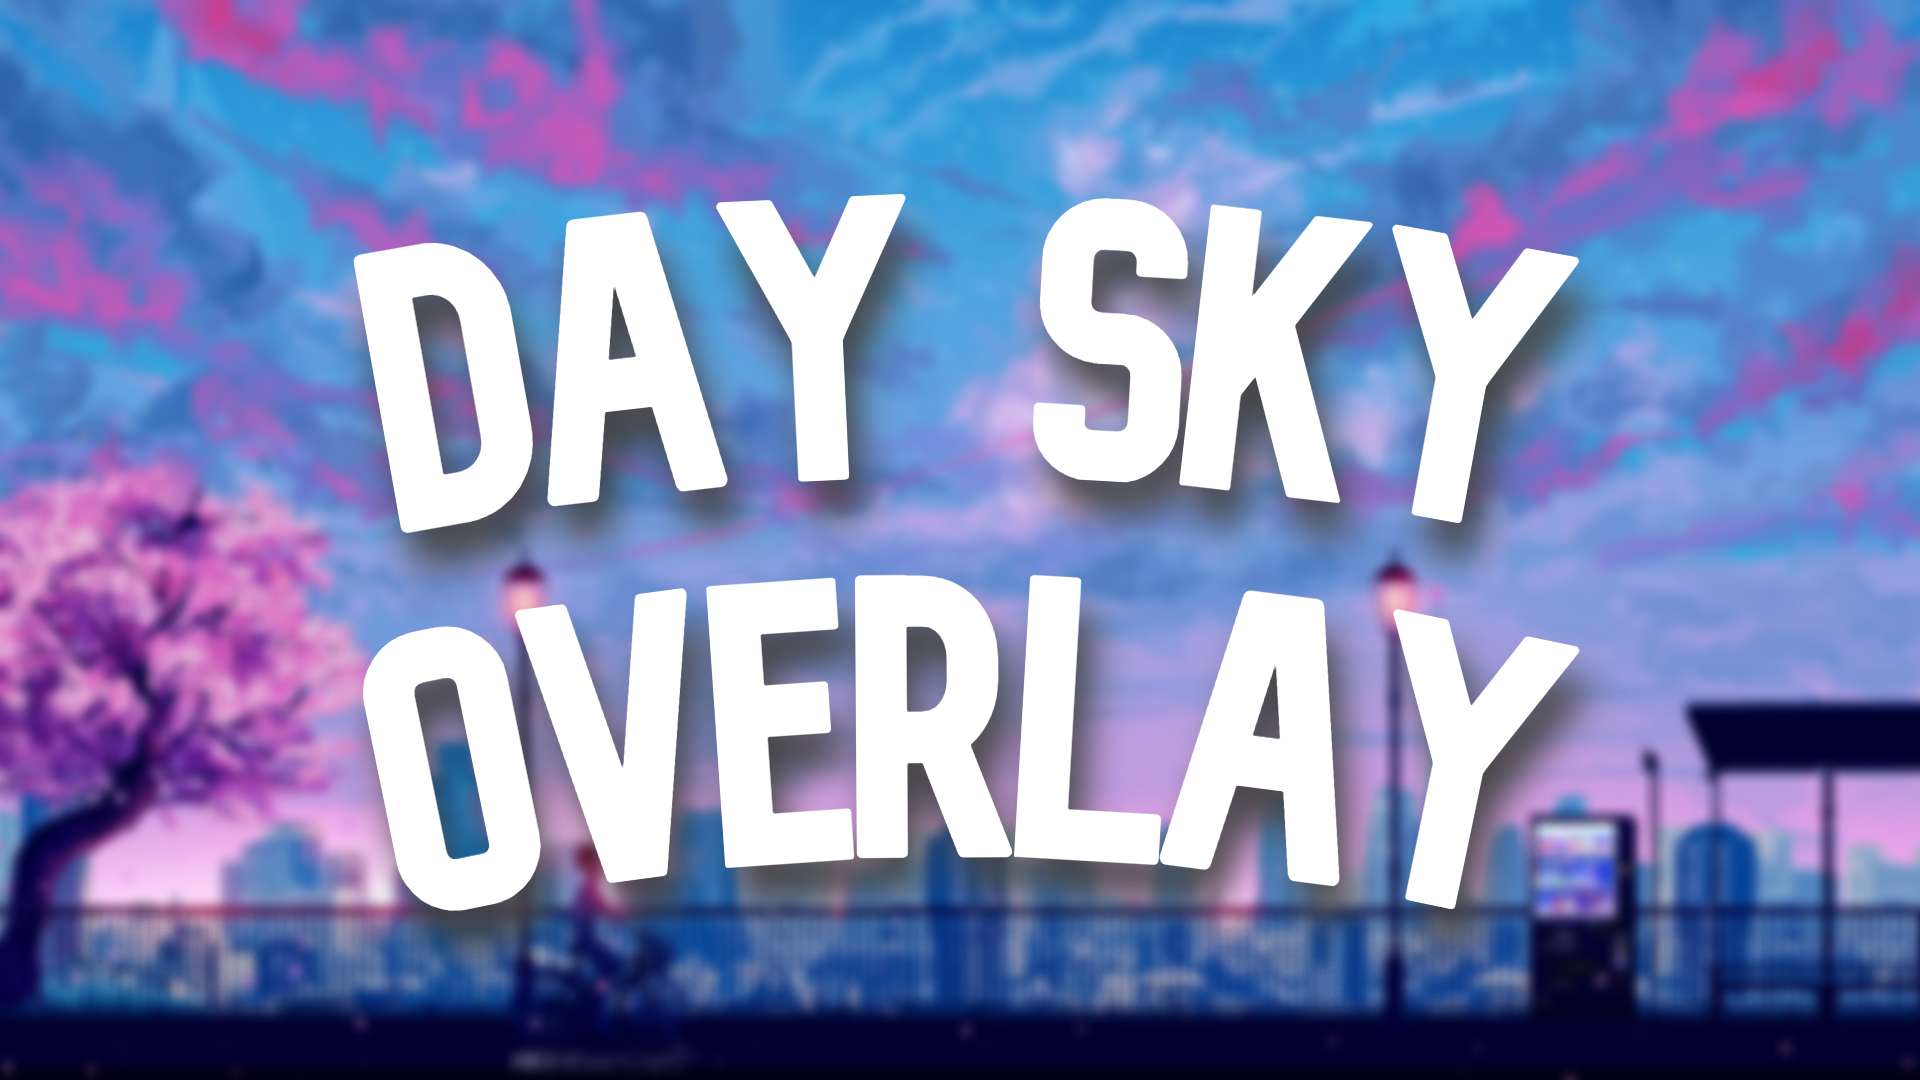 Day Sky Overlay #9 16x by rh56 on PvPRP